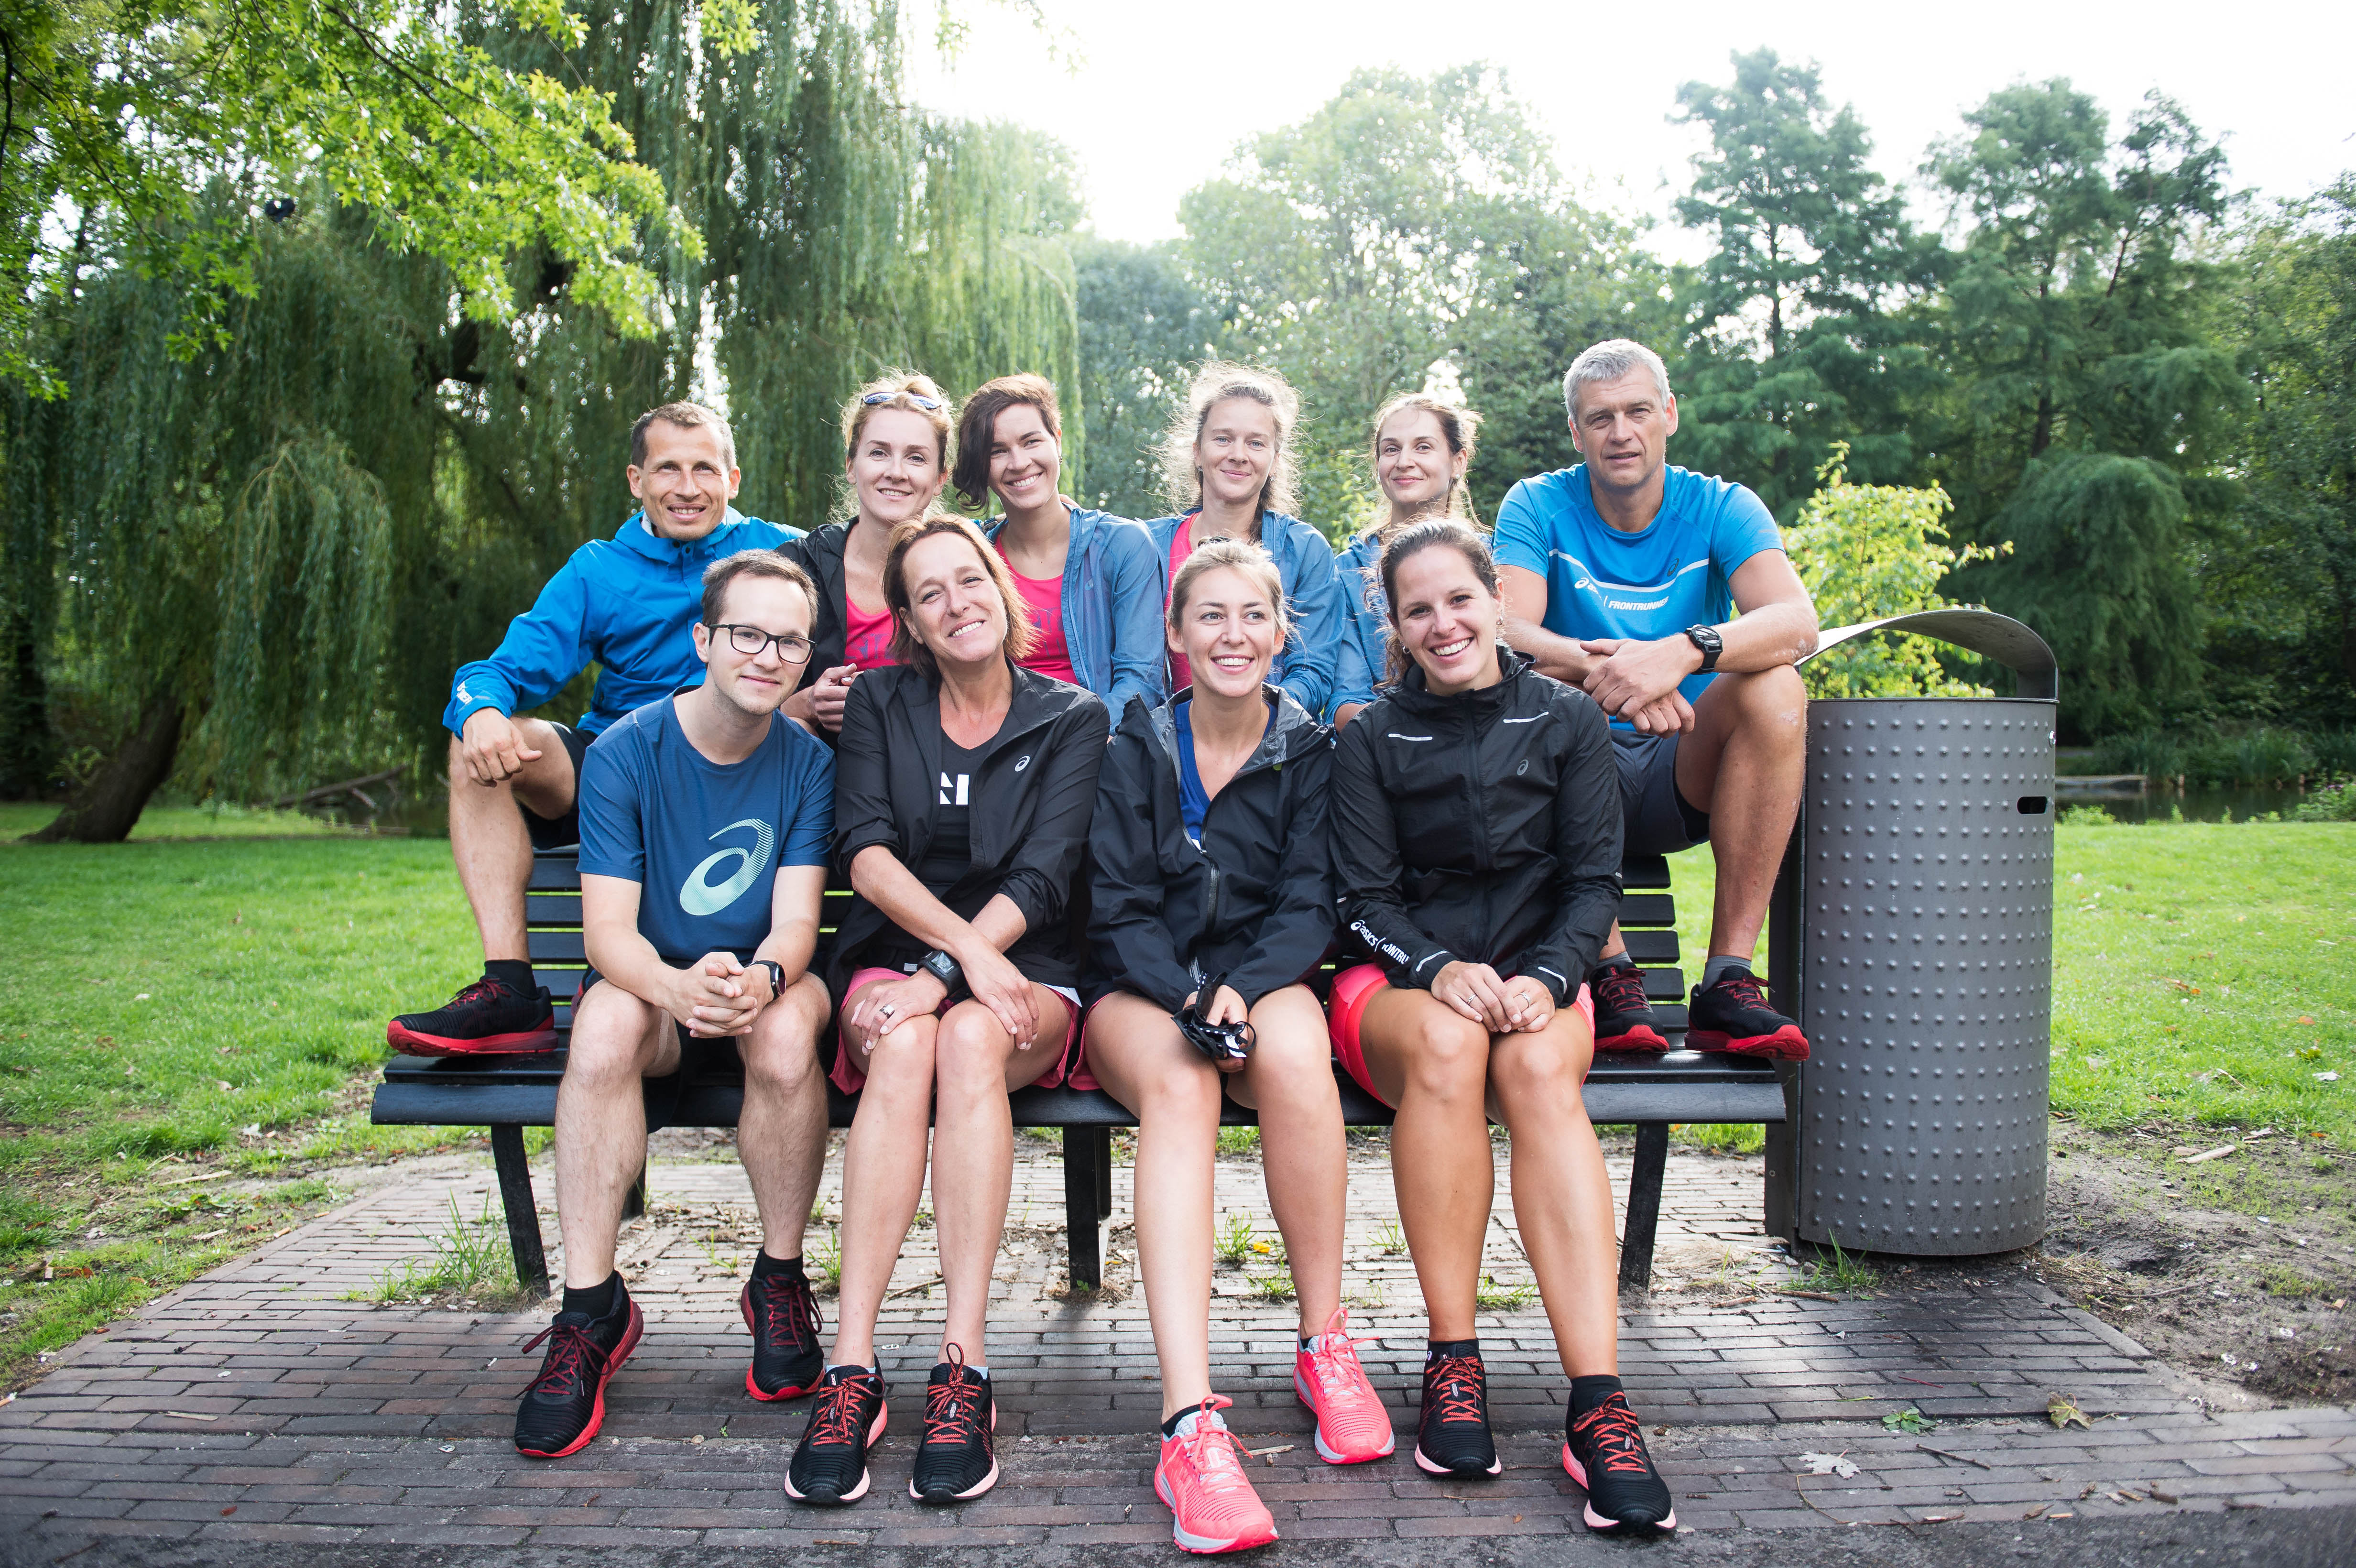 AMSTERDAM, NETHERLANDS - AUGUST 27: during the ASICS Frontrunner Global Meeting on August 27, 2018 in Amsterdam, Netherlands. (Photo by Andy Astfalck)